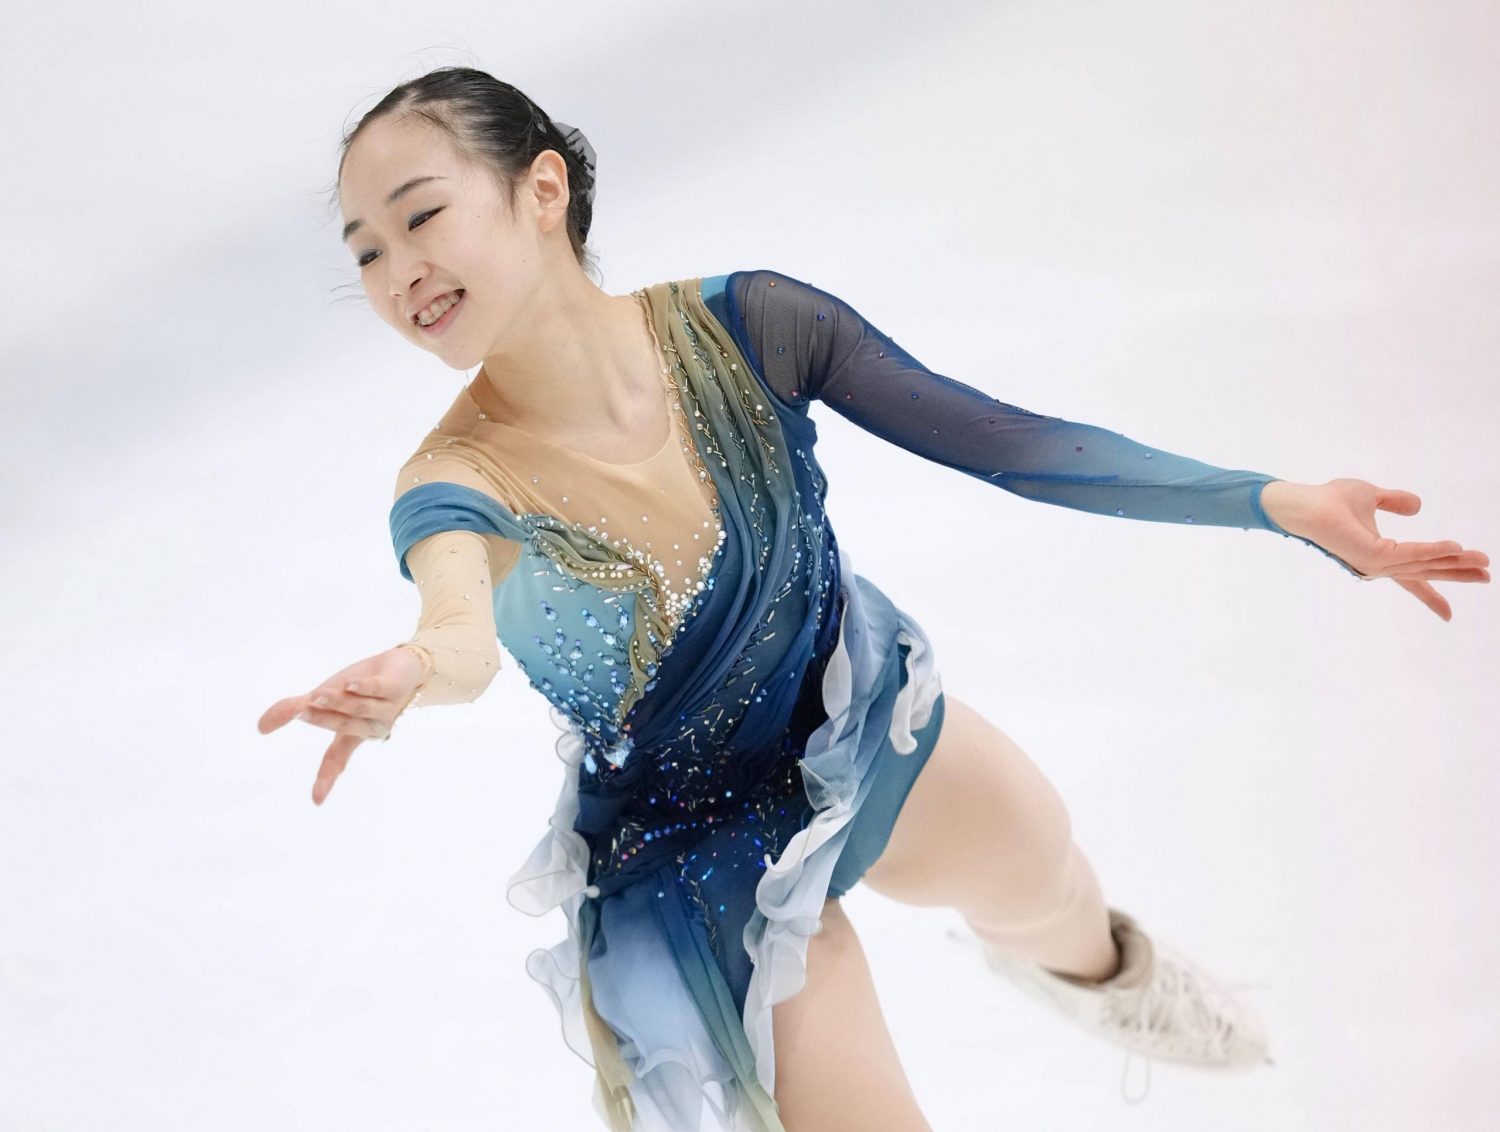 [ICE TIME] Rika Kihira Begins Comeback with Respectable Showing in ...